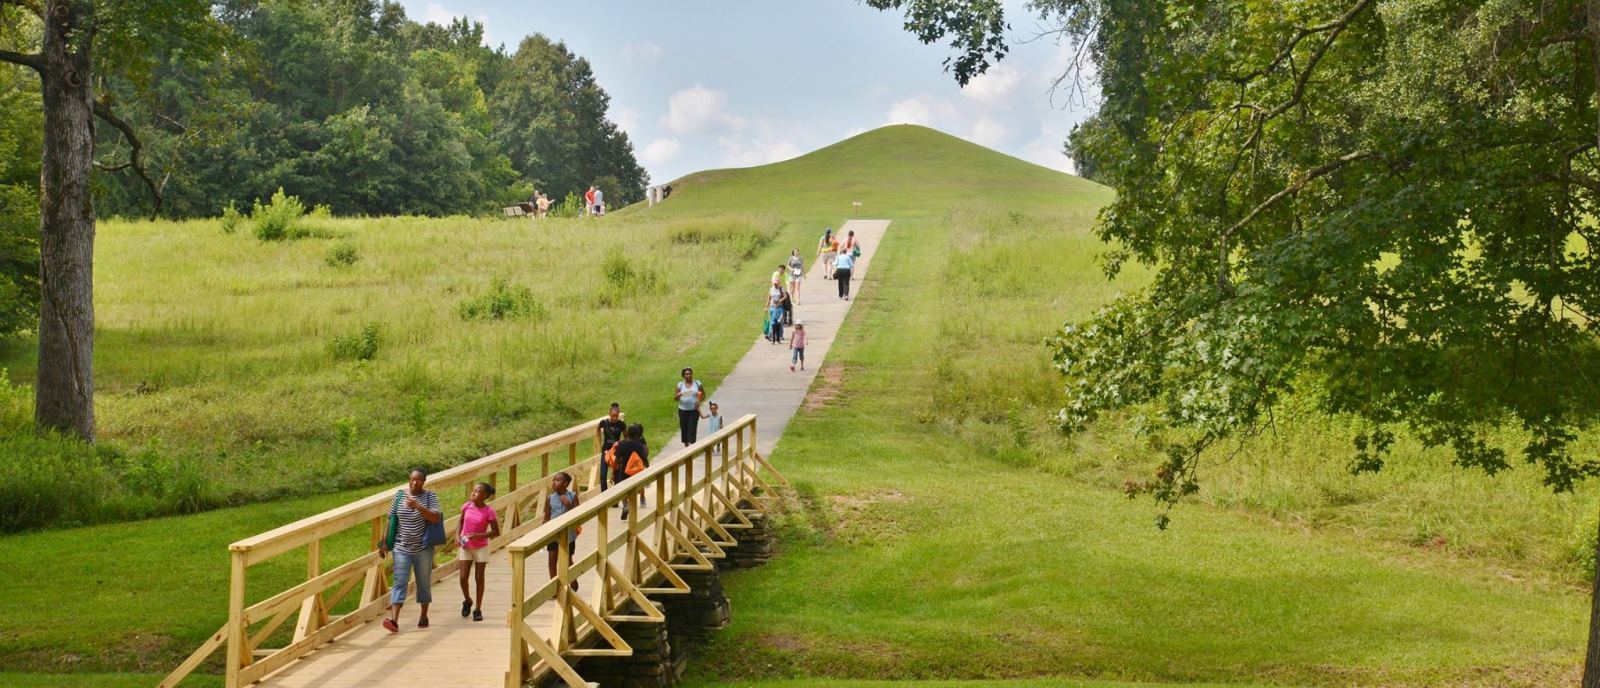 Ocmulgee Mounds Macon's Hidden Gems: Moving to the Heart of Georgia